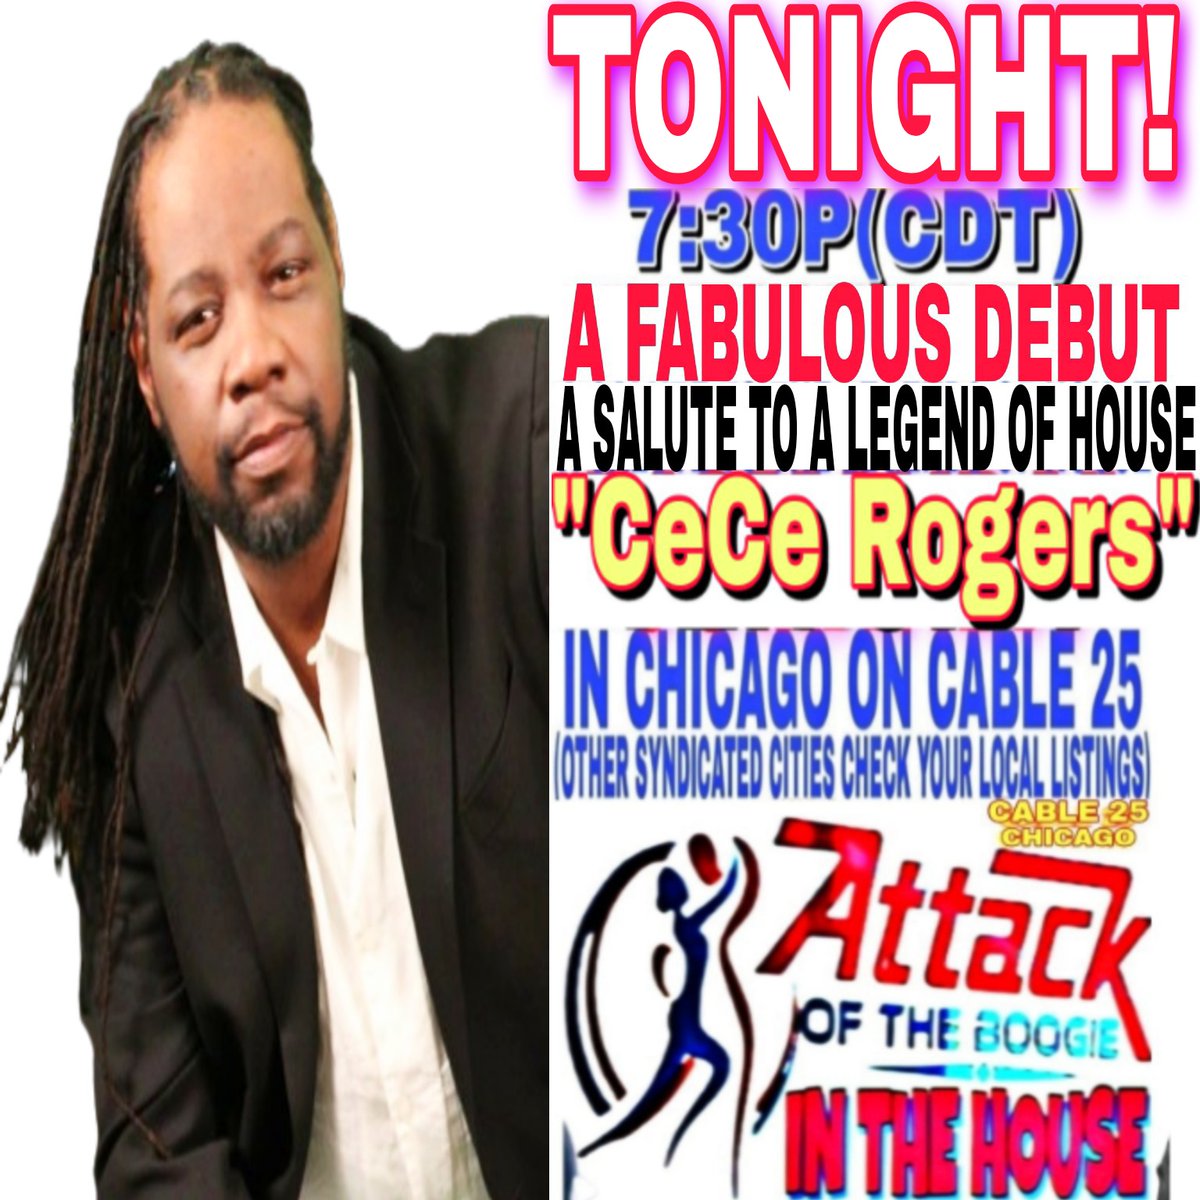 TONIGHT!
A SALUTE TO A LEGEND OF HOUSE
'CeCe Rogers'
ATTACK OF THE BOOGIE IN THE HOUSE
FRIDAY, JUNE 2ND. 7:30P(CDT)
IN CHICAGO ON CABLE 25
(OTHER SYNDICATED CITIES CHECK YOUR LOCAL LISTINGS)
@cecerogers #cecerogers #deephouse #SOLDIERFIELD #marcusmixx #fridaymorning #music #dj